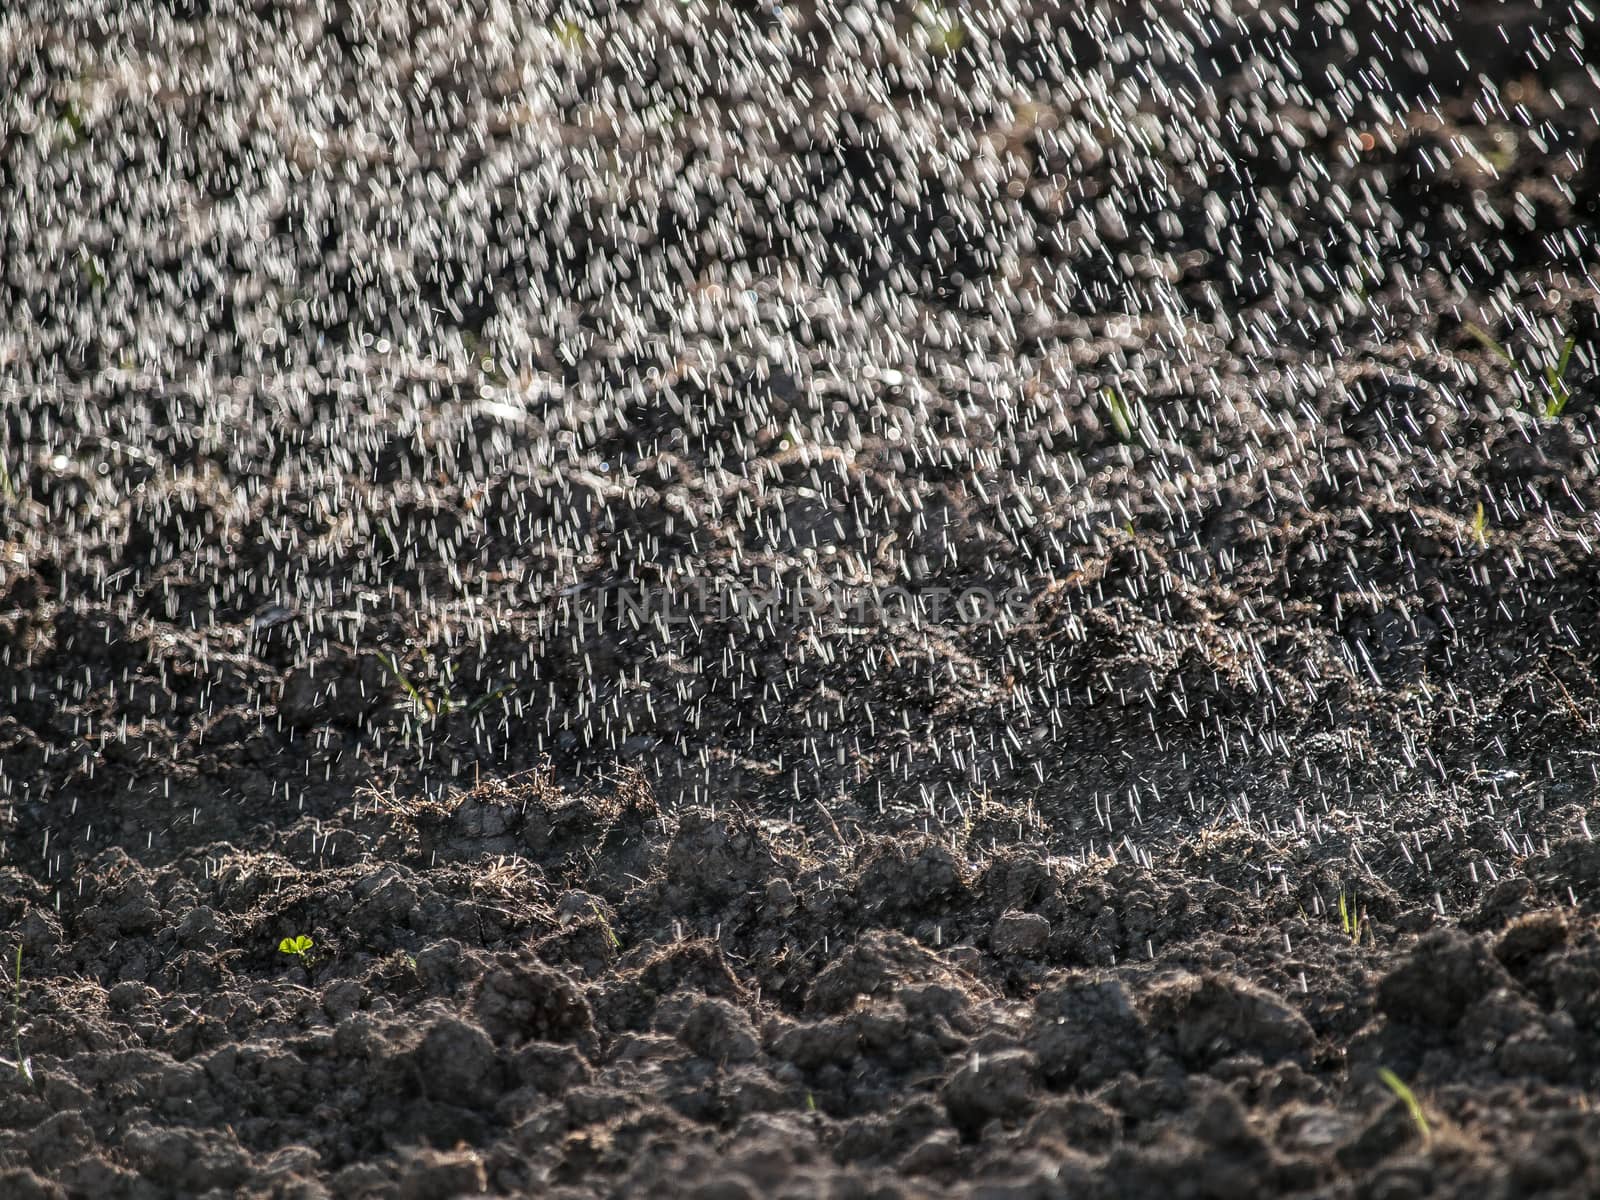 Spraying water over cultivated land by Alex_L